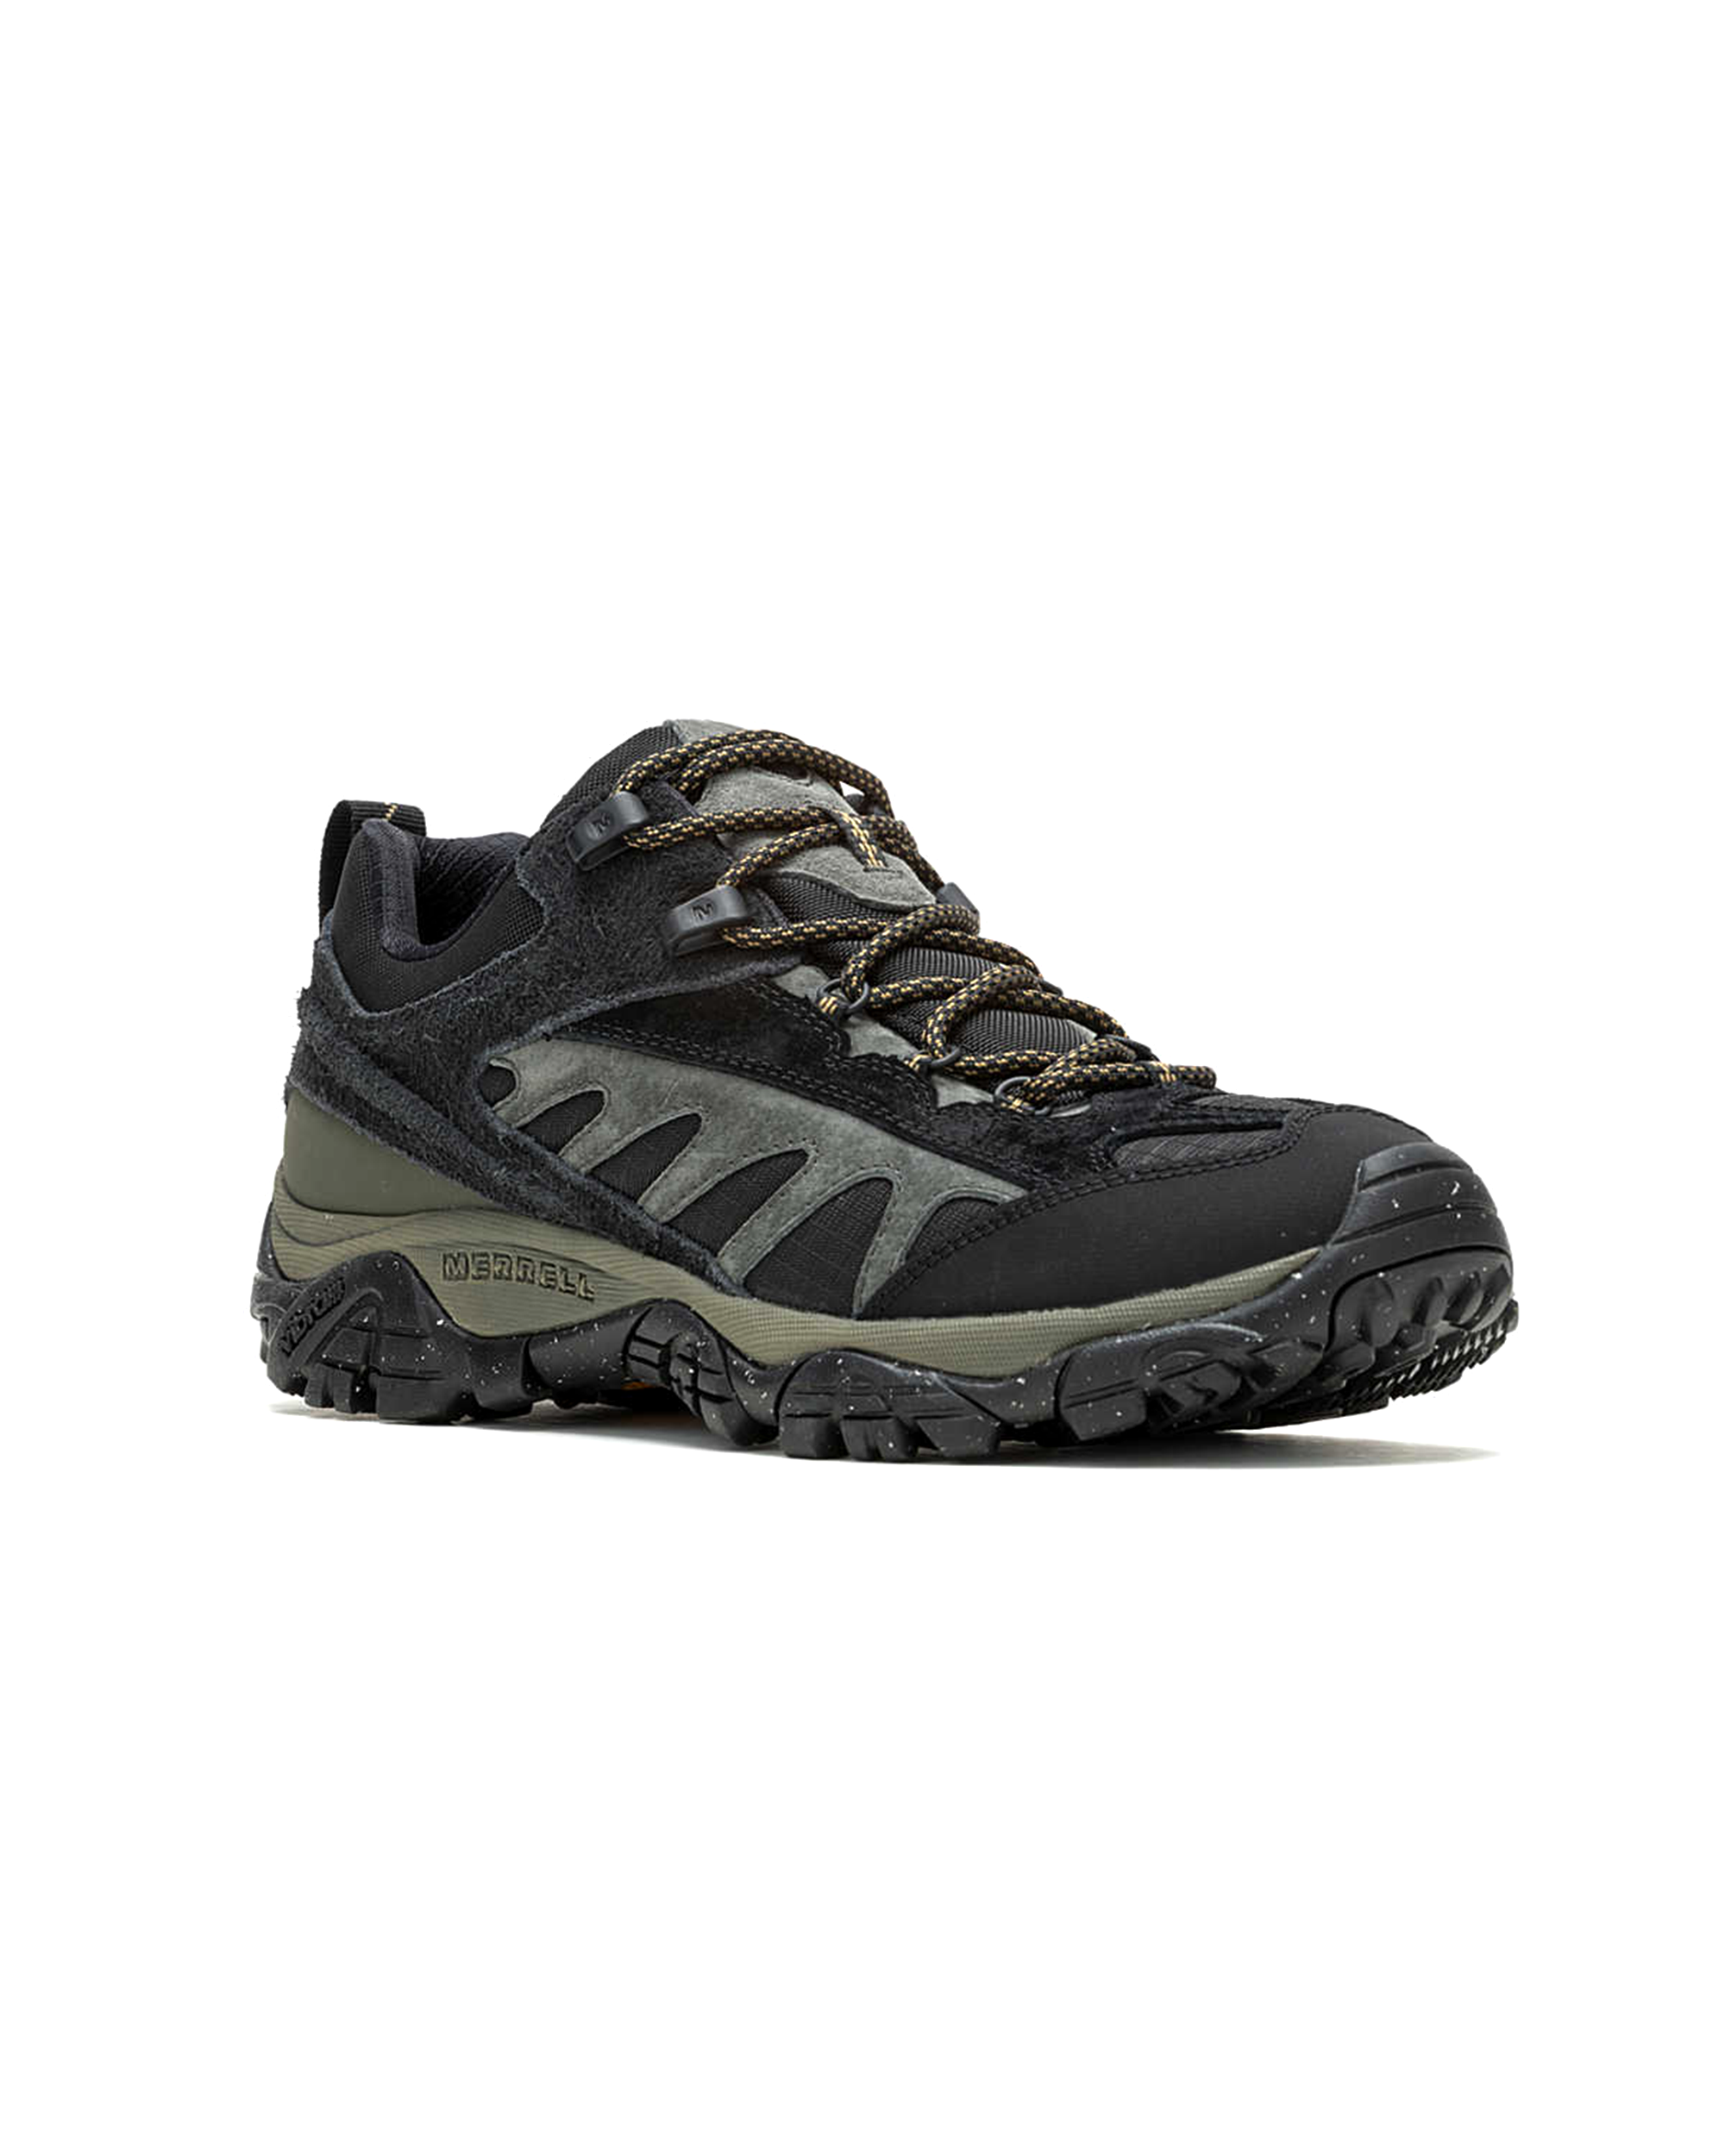 Moab Mesa Luxe 1 TRL - Black / Olive